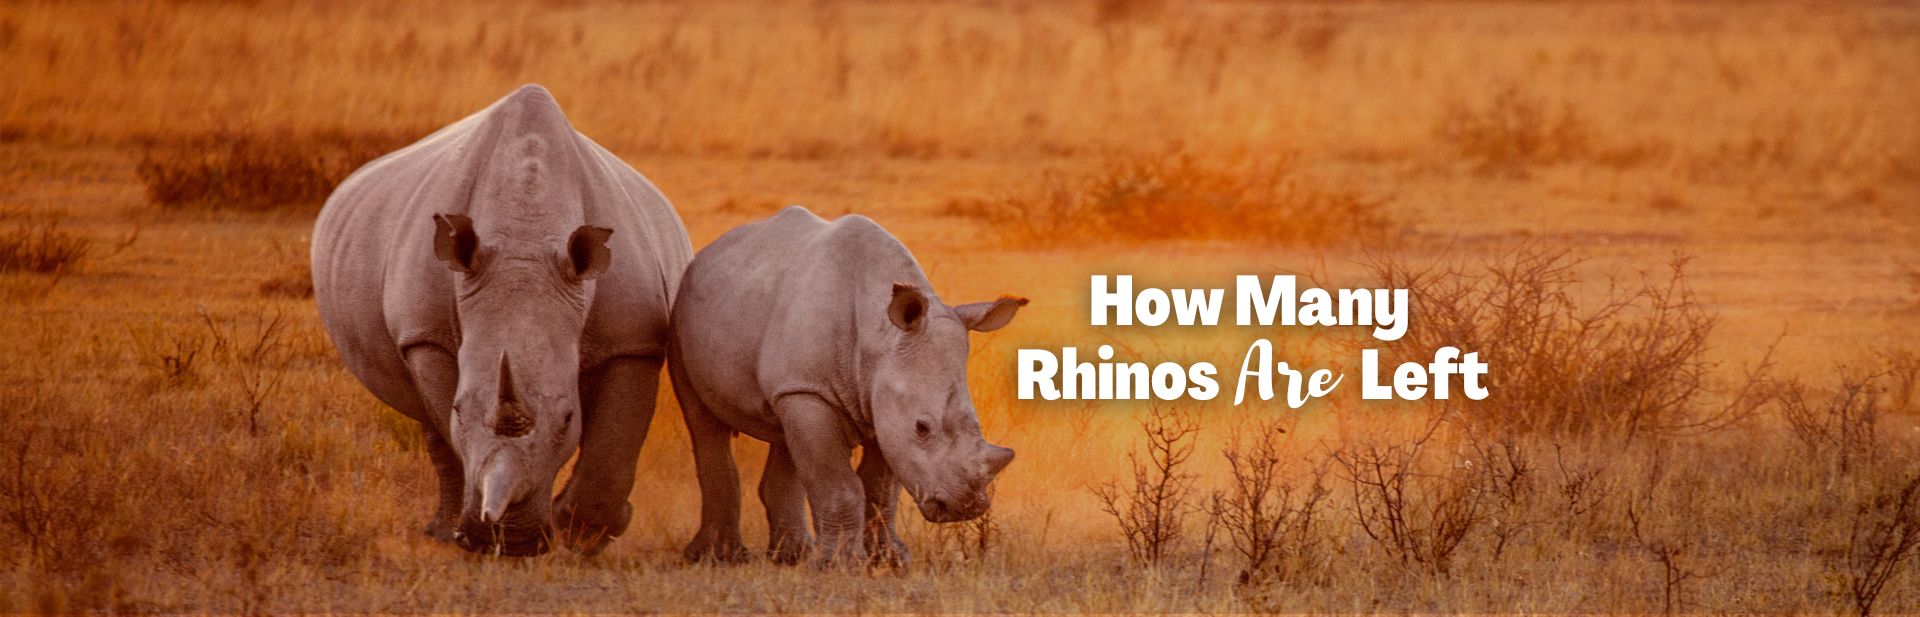 How Many Rhinos Are Left Today? Learn About the Crisis Facing These Majestic Creatures